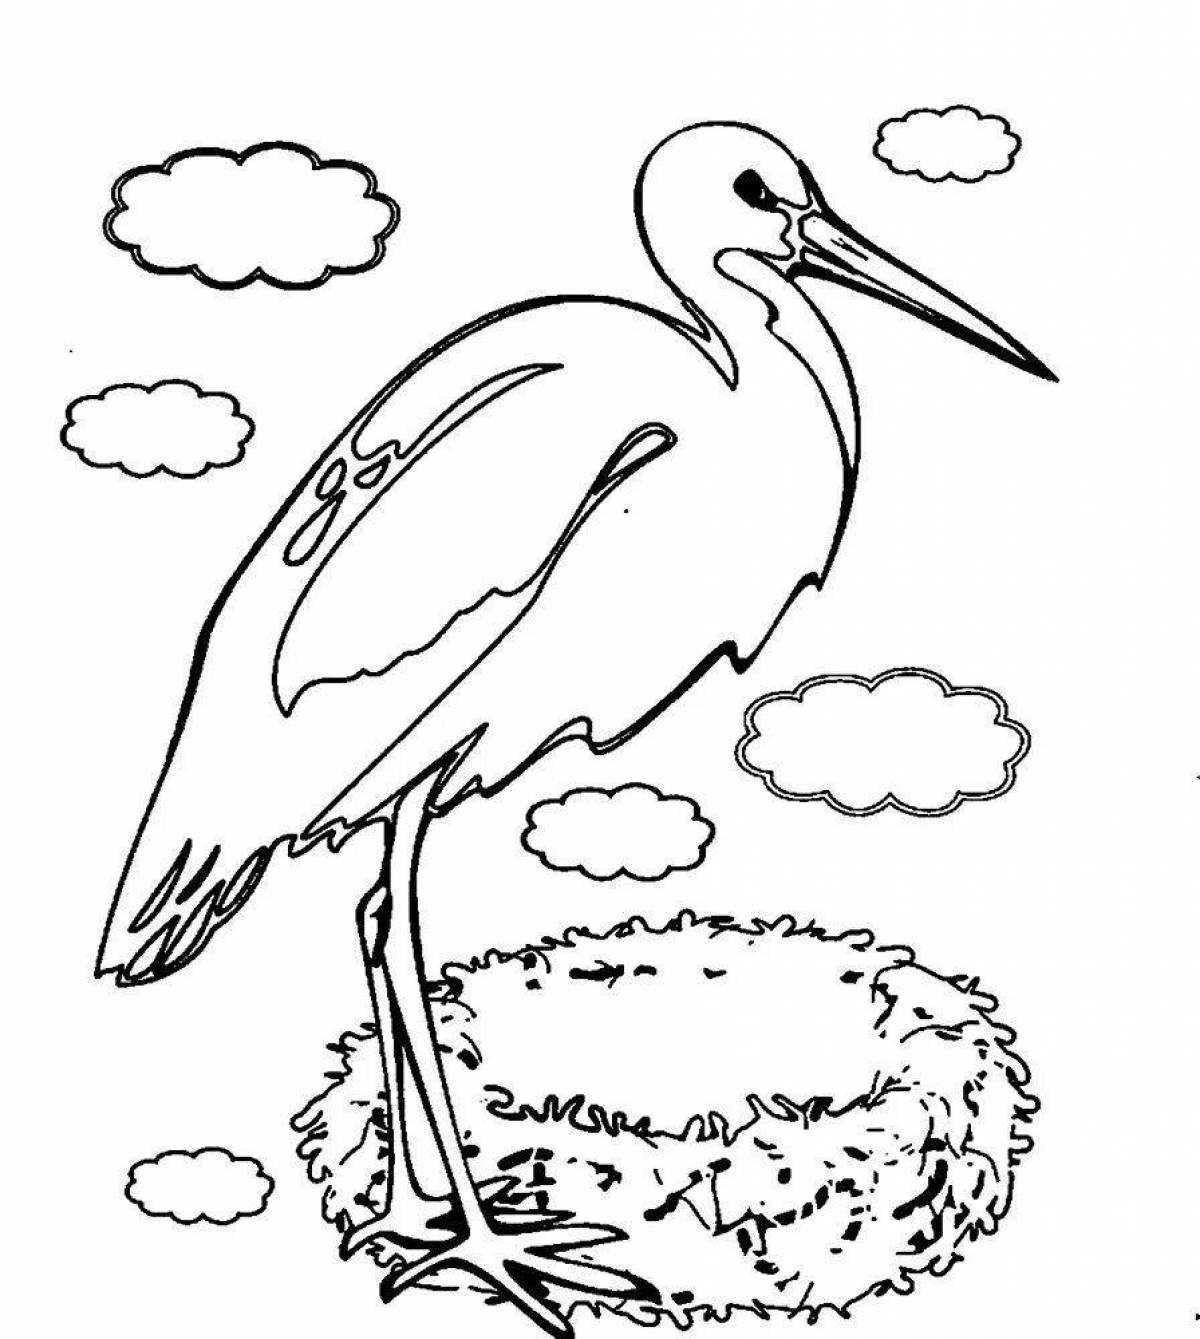 Funny migratory birds coloring pages for children 5-6 years old